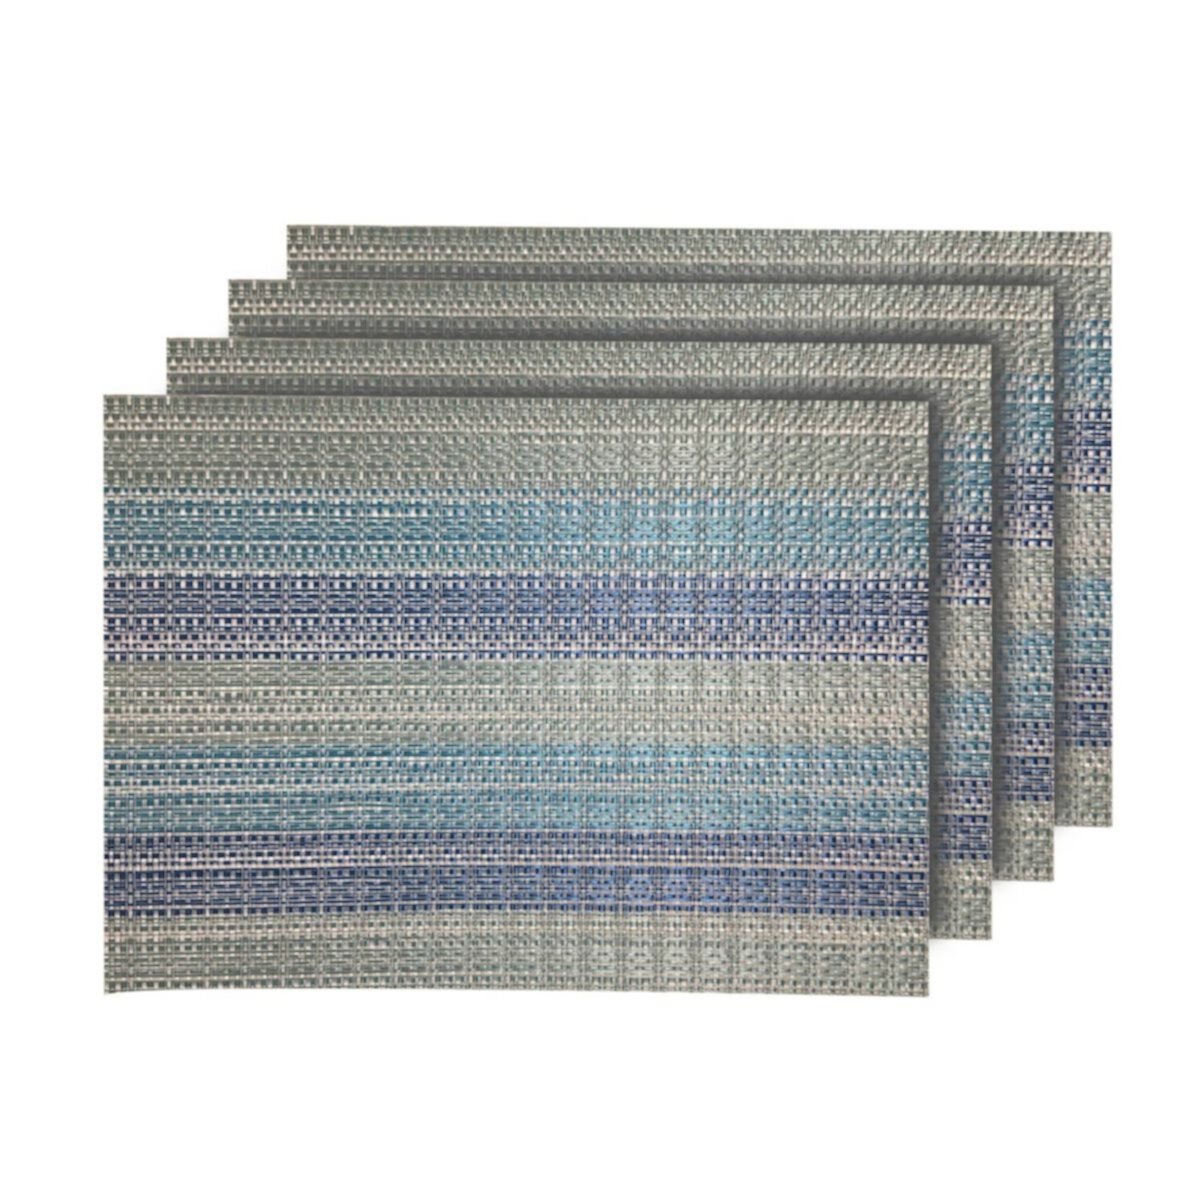 Dainty Home Yorkshire Woven Vinyl Reversible Rectangular Placemat Set of 4 Dainty Home